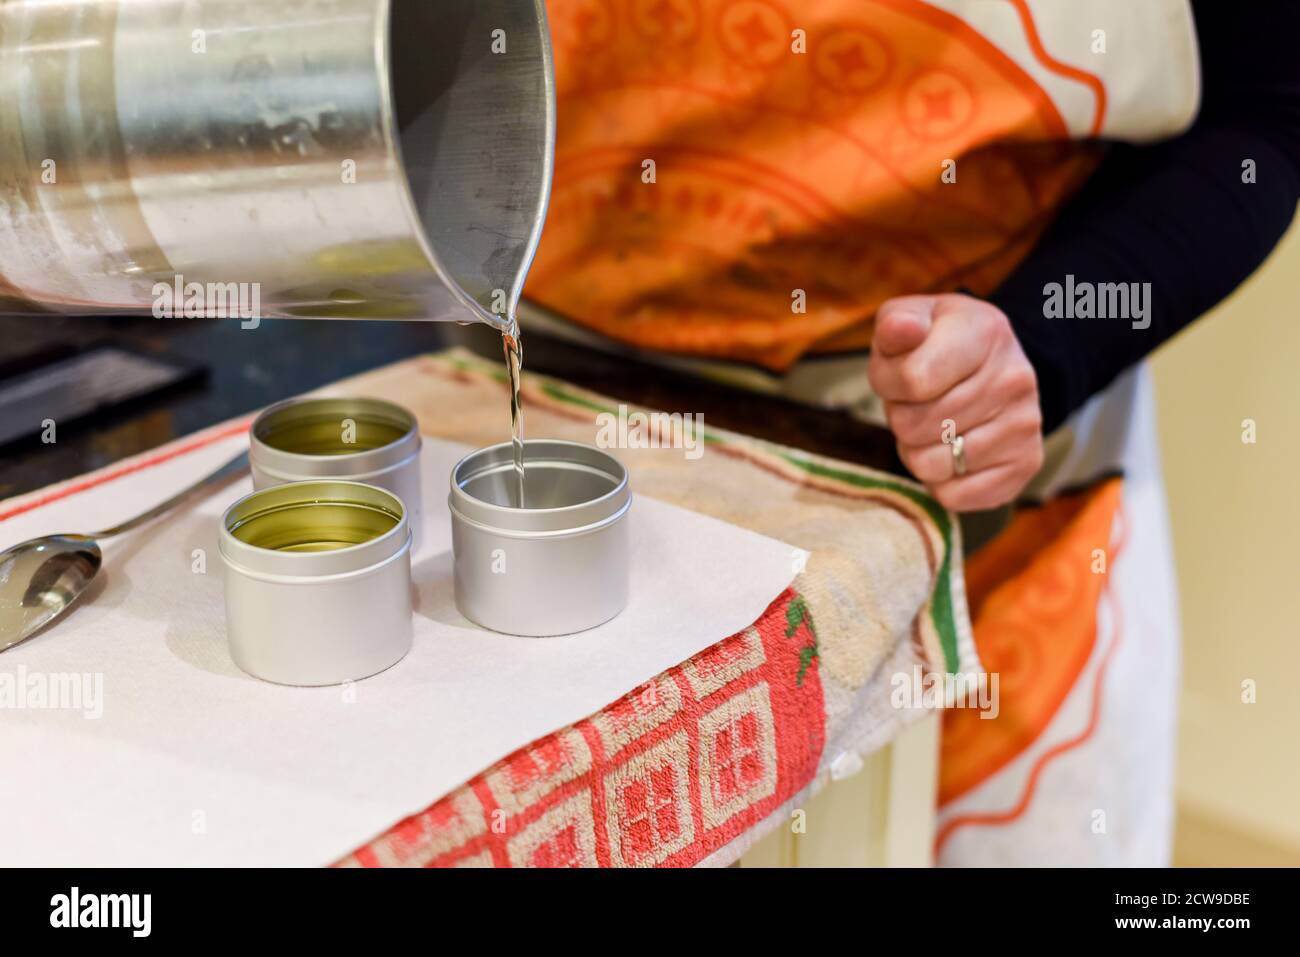 Creative occupation of candle making showing the pouring of liquid wax into jars Stock Photo